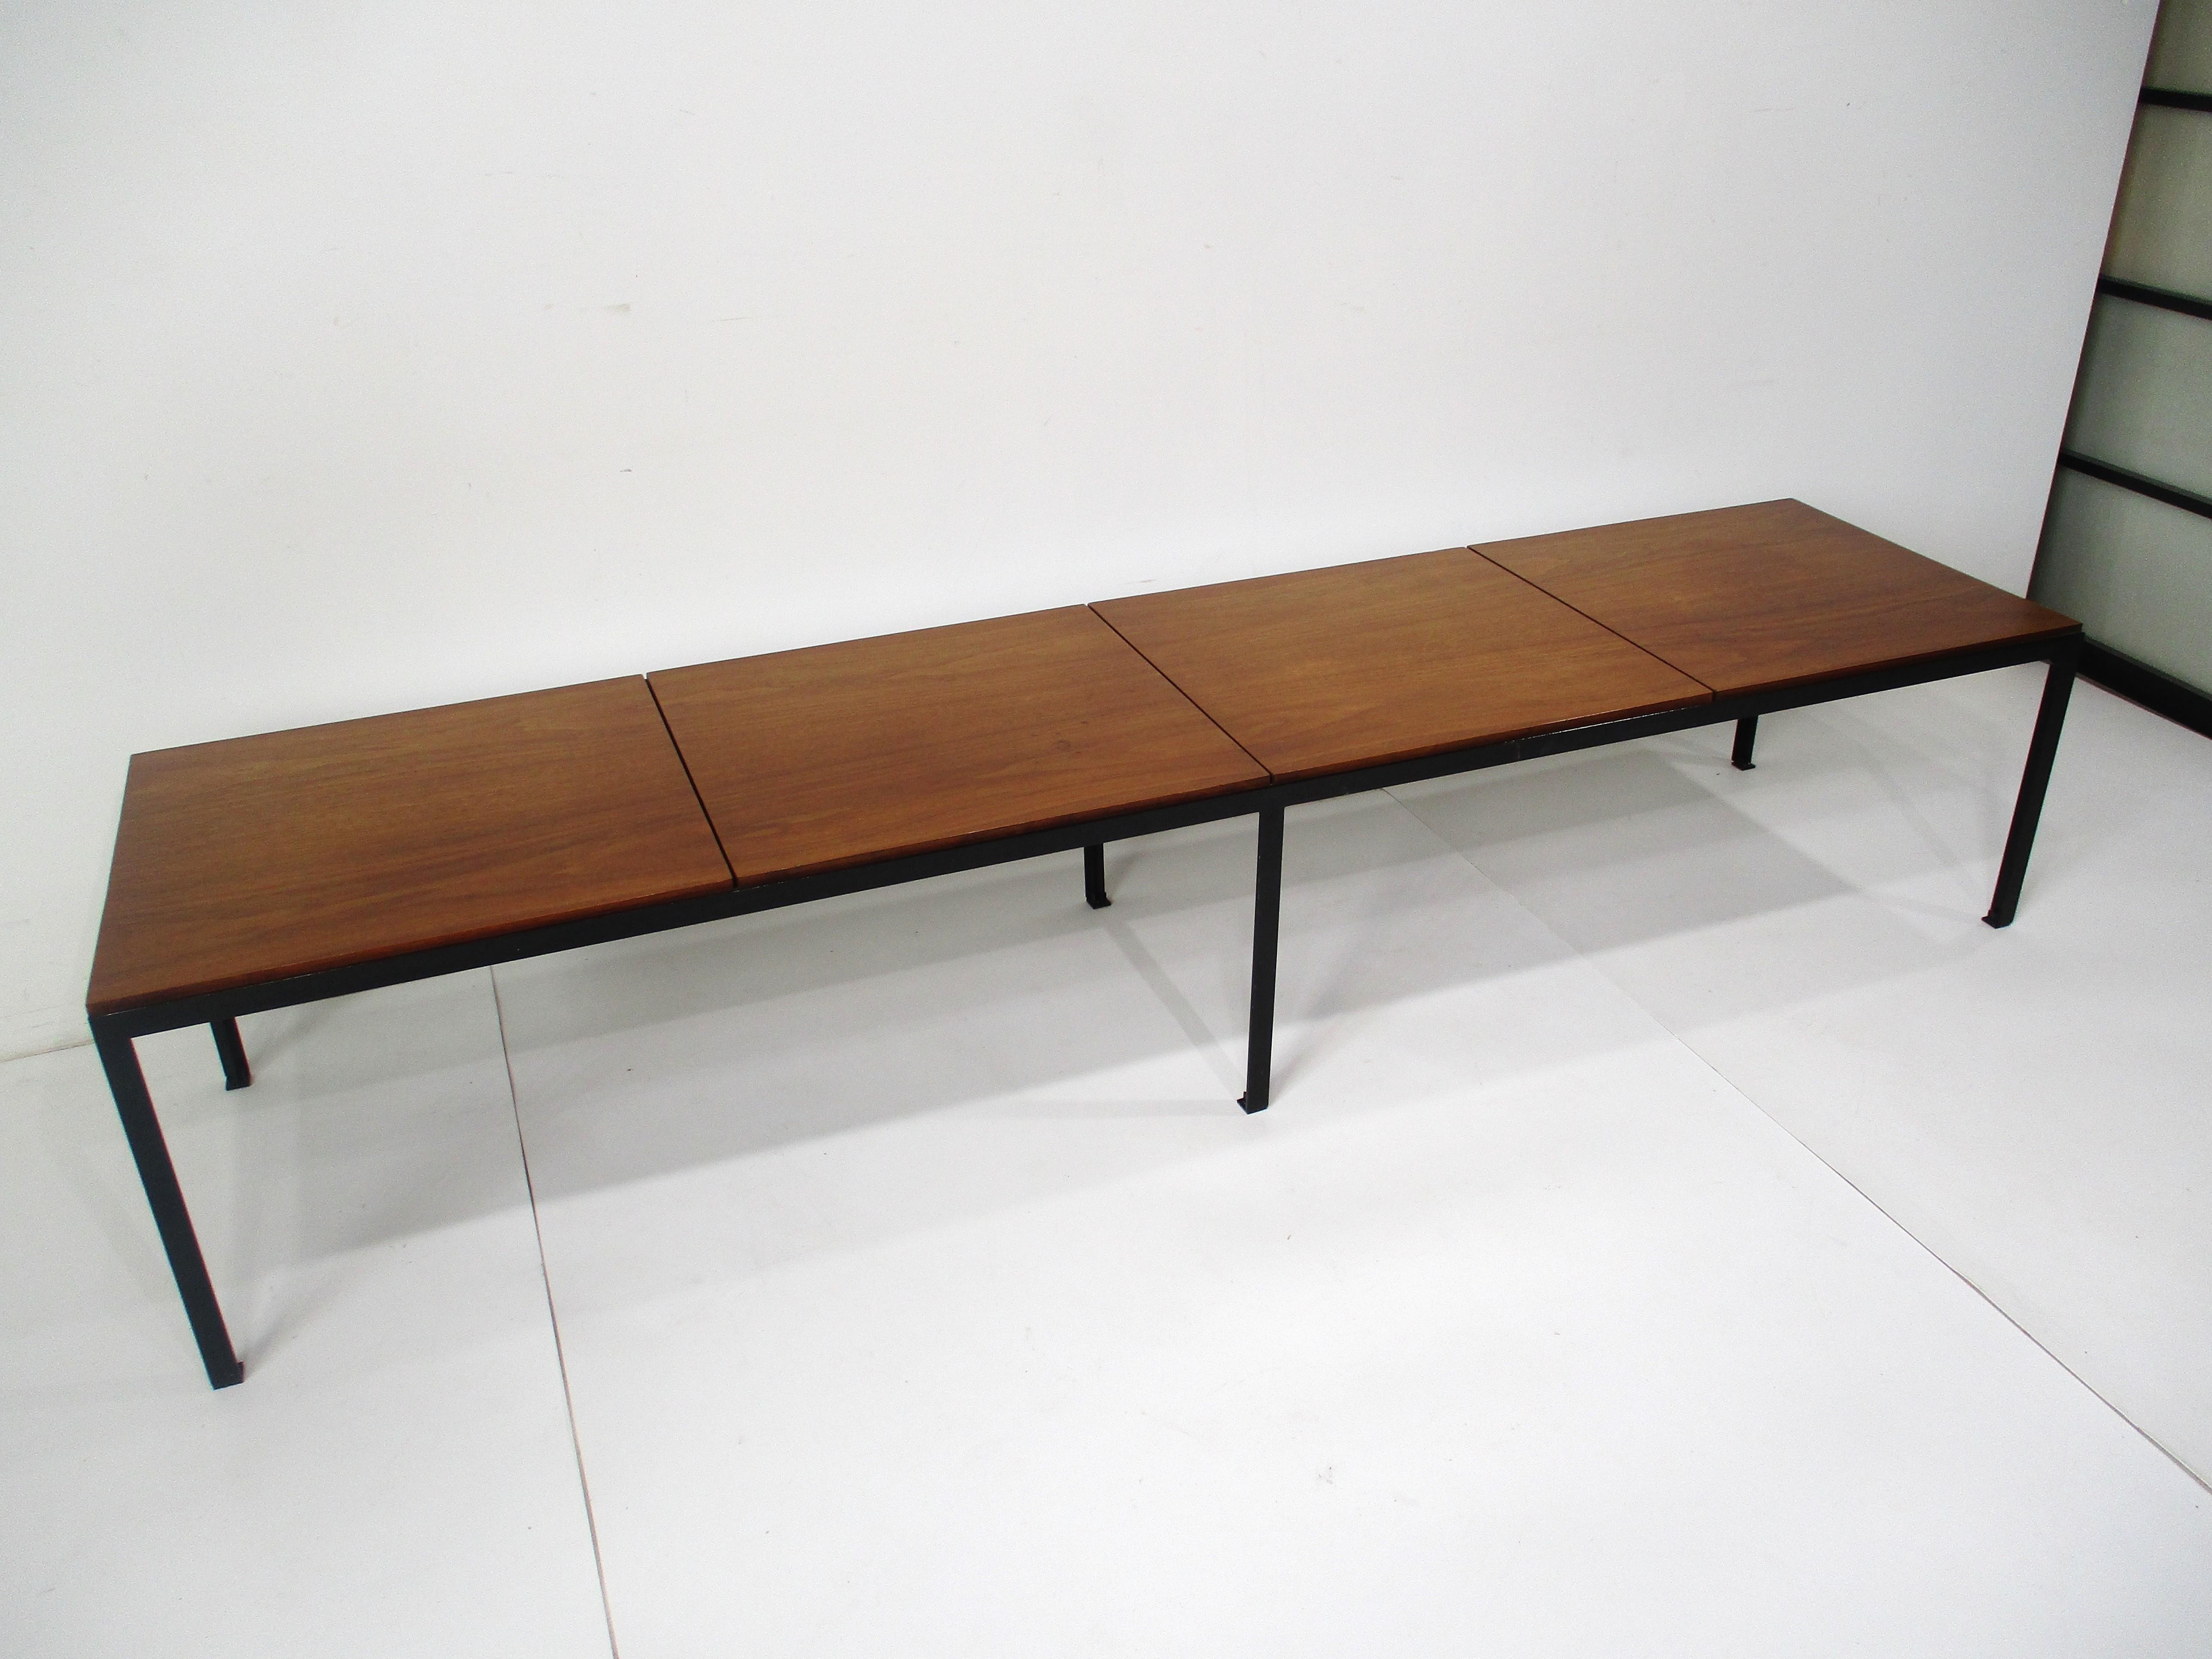 Early T Angle Walnut Coffee Table / Bench by Florence Knoll # 332 for Knoll (A)  In Good Condition For Sale In Cincinnati, OH